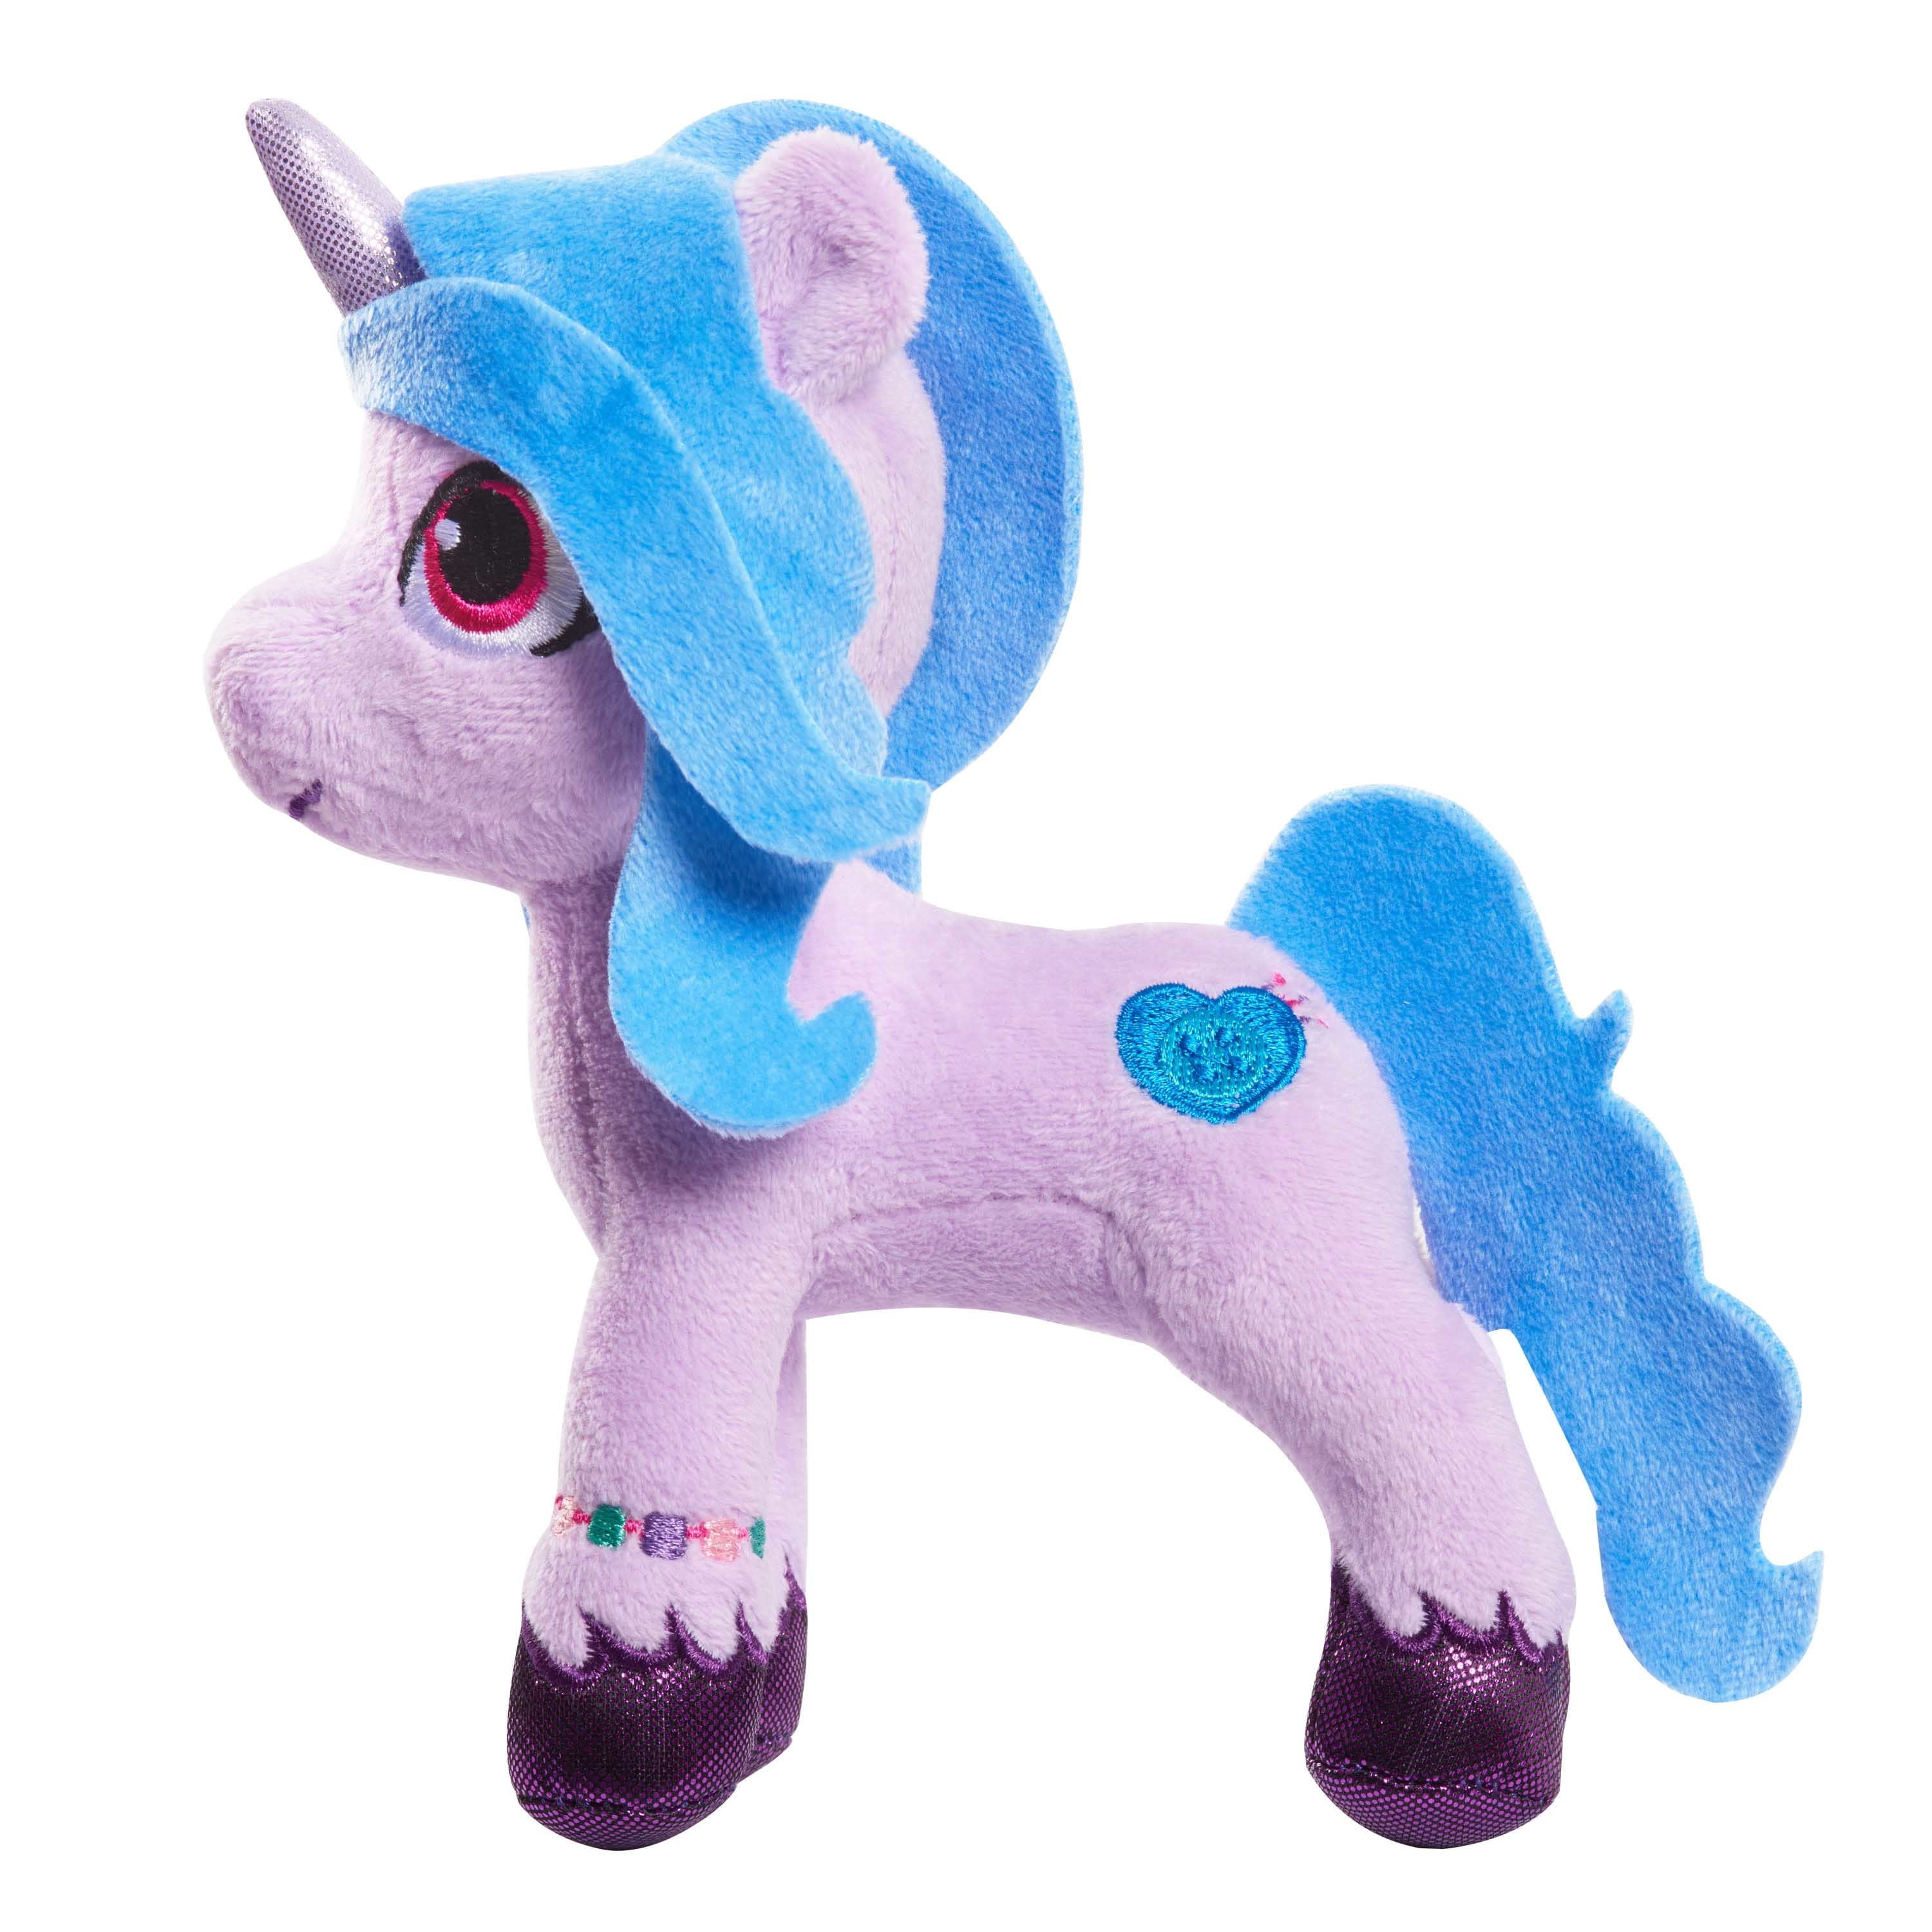 It's Girl Stuff My Pretty Pony Horse Toy With Hair Accessories ~ Blue 